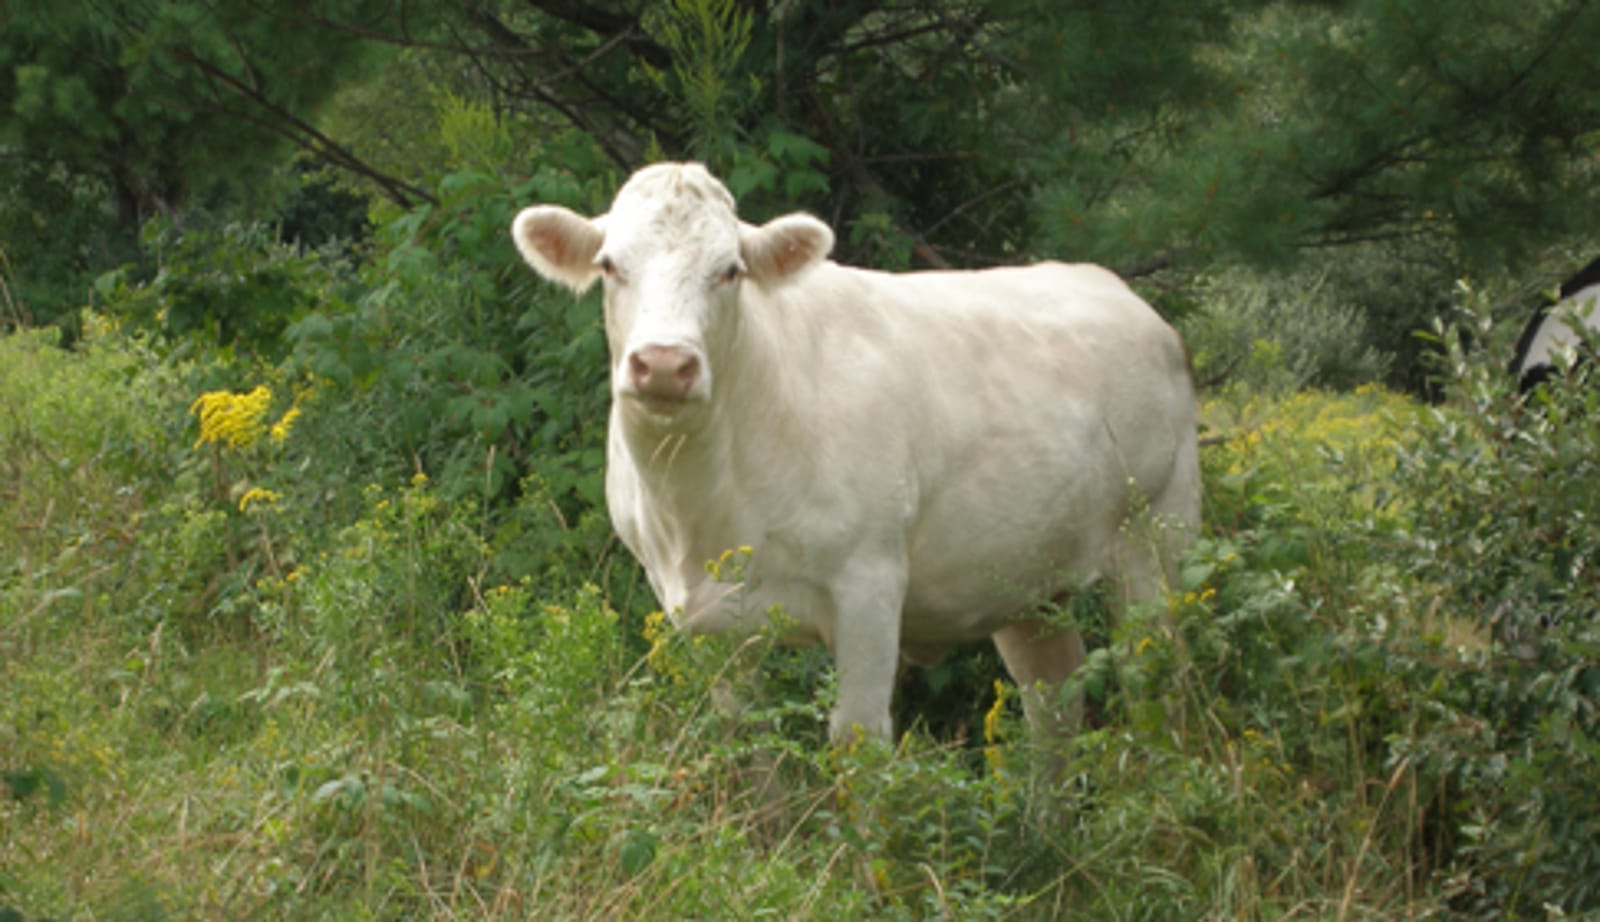 Remembering Cincinnati Freedom: The Legendary Cow Who Escaped a Slaughterhouse